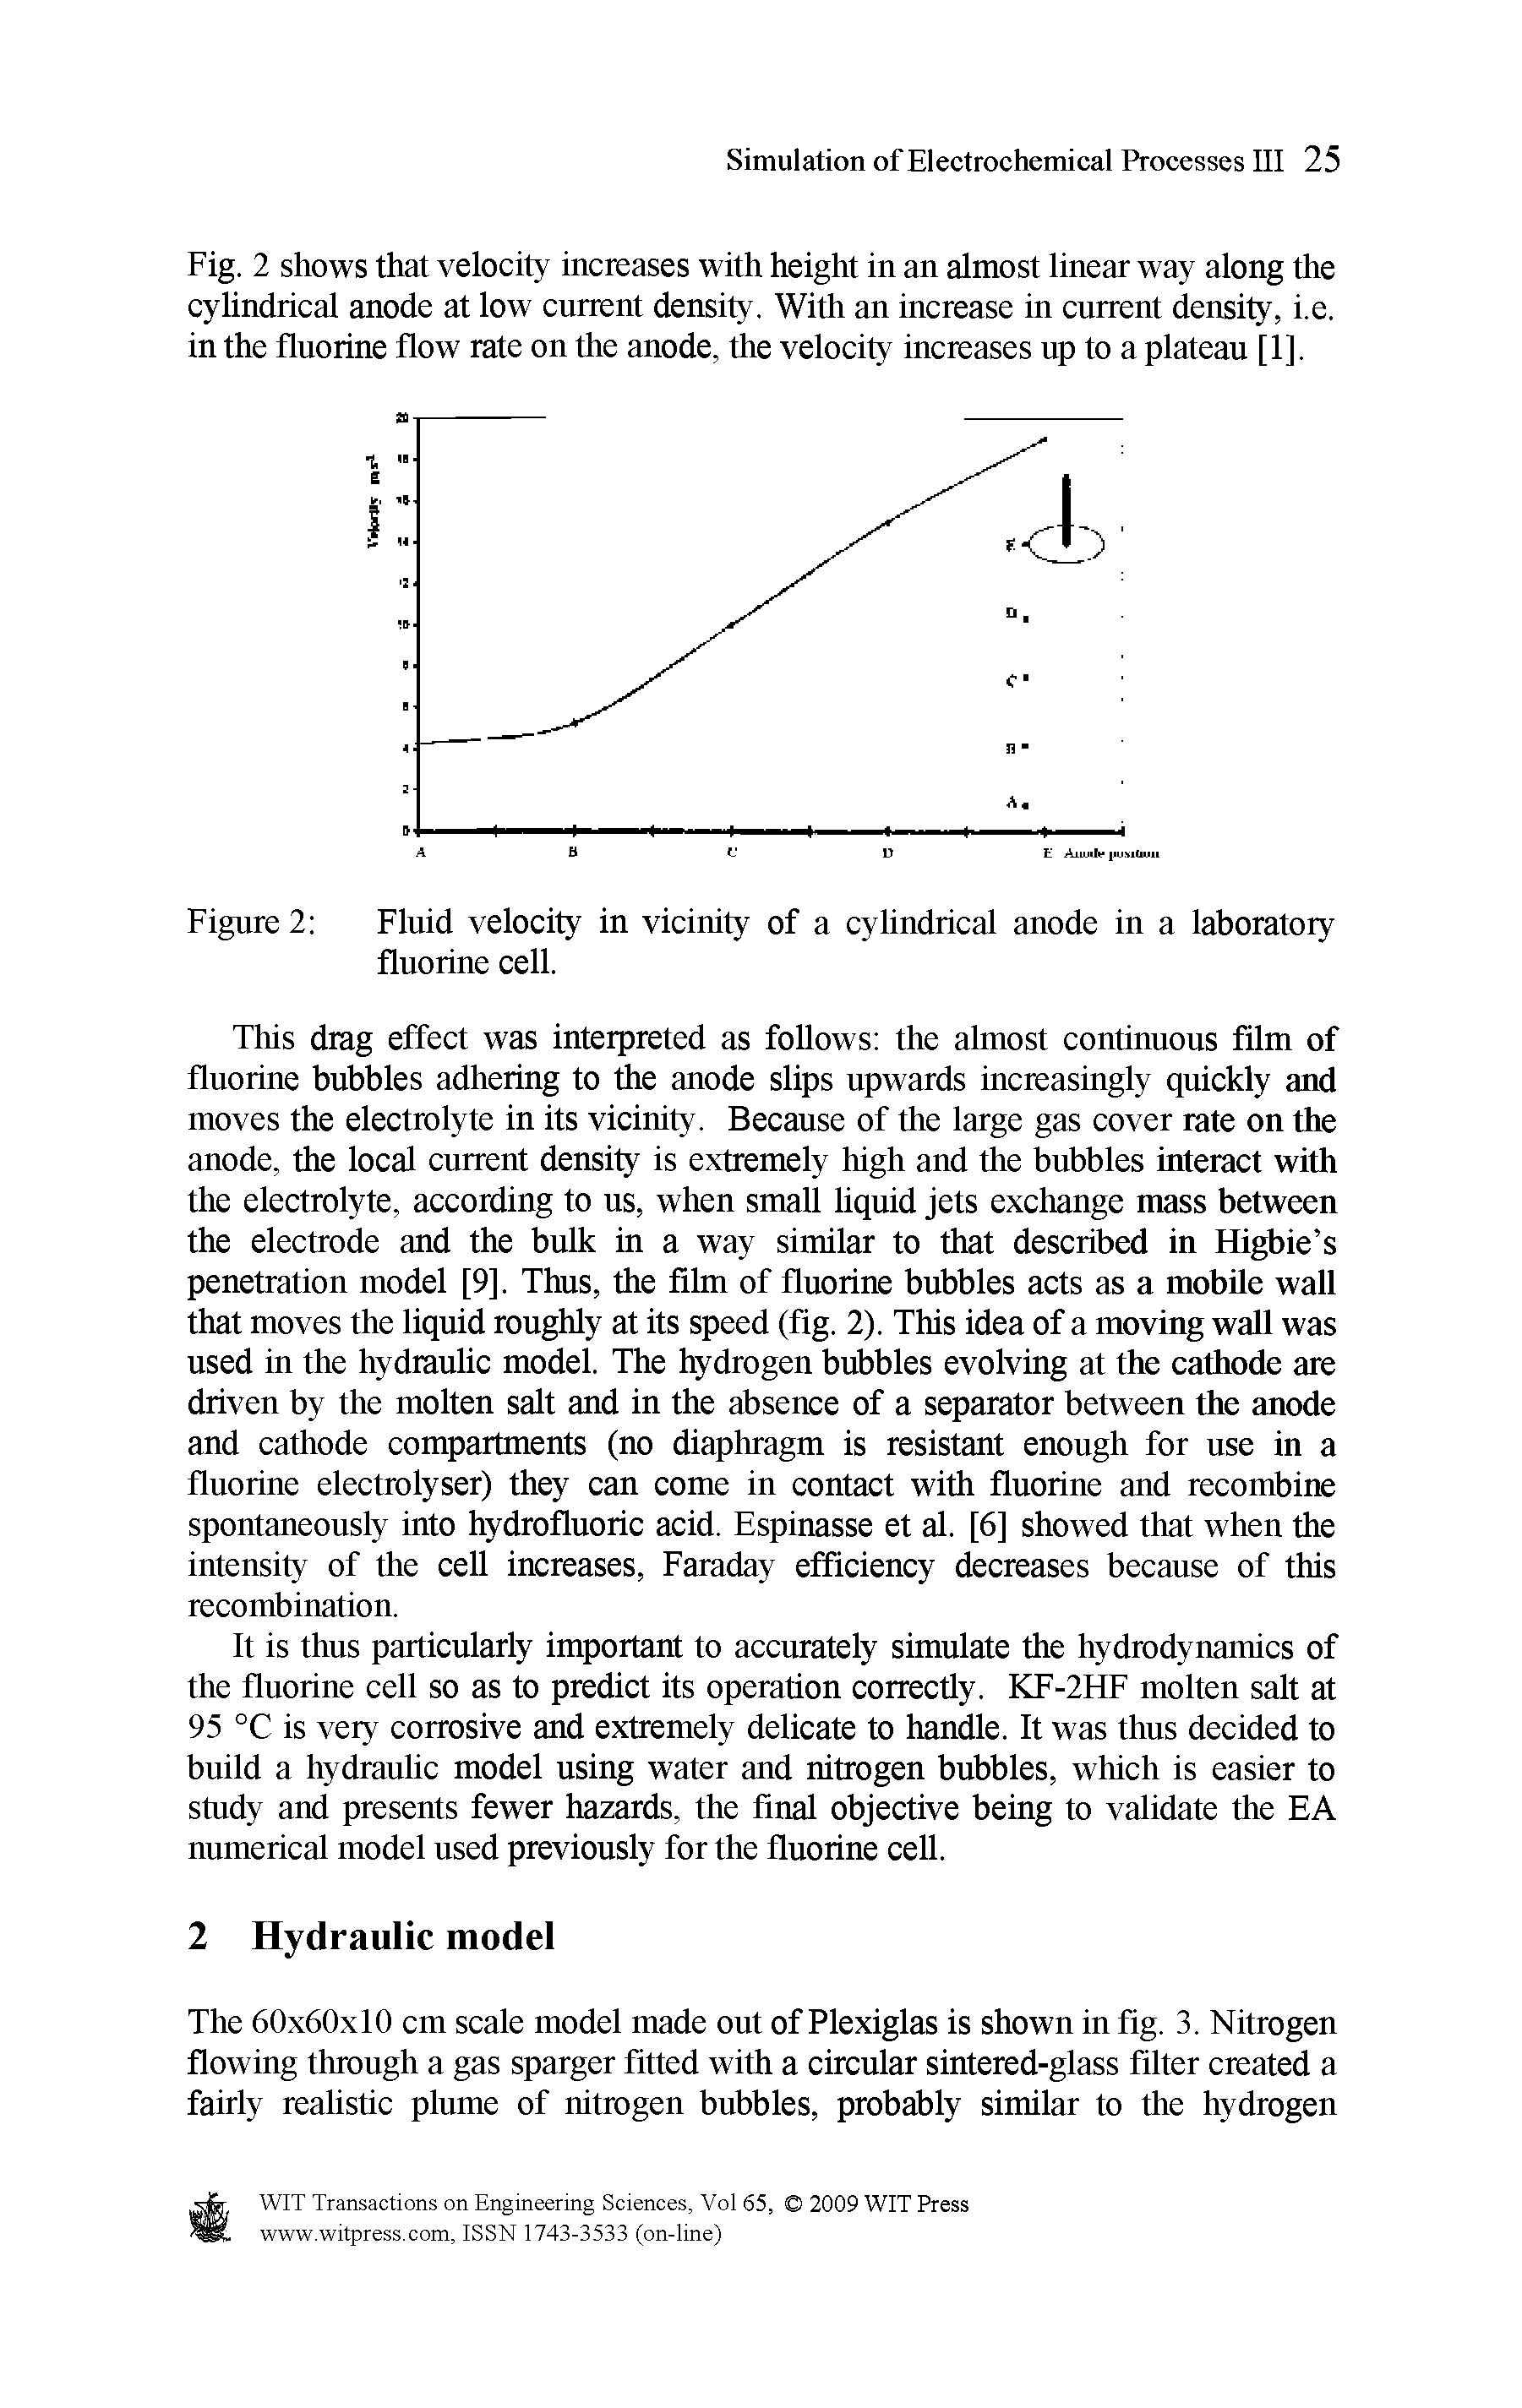 Figure 2 Fluid velocity in vicinity of a cylindrical anode in a laboratory...